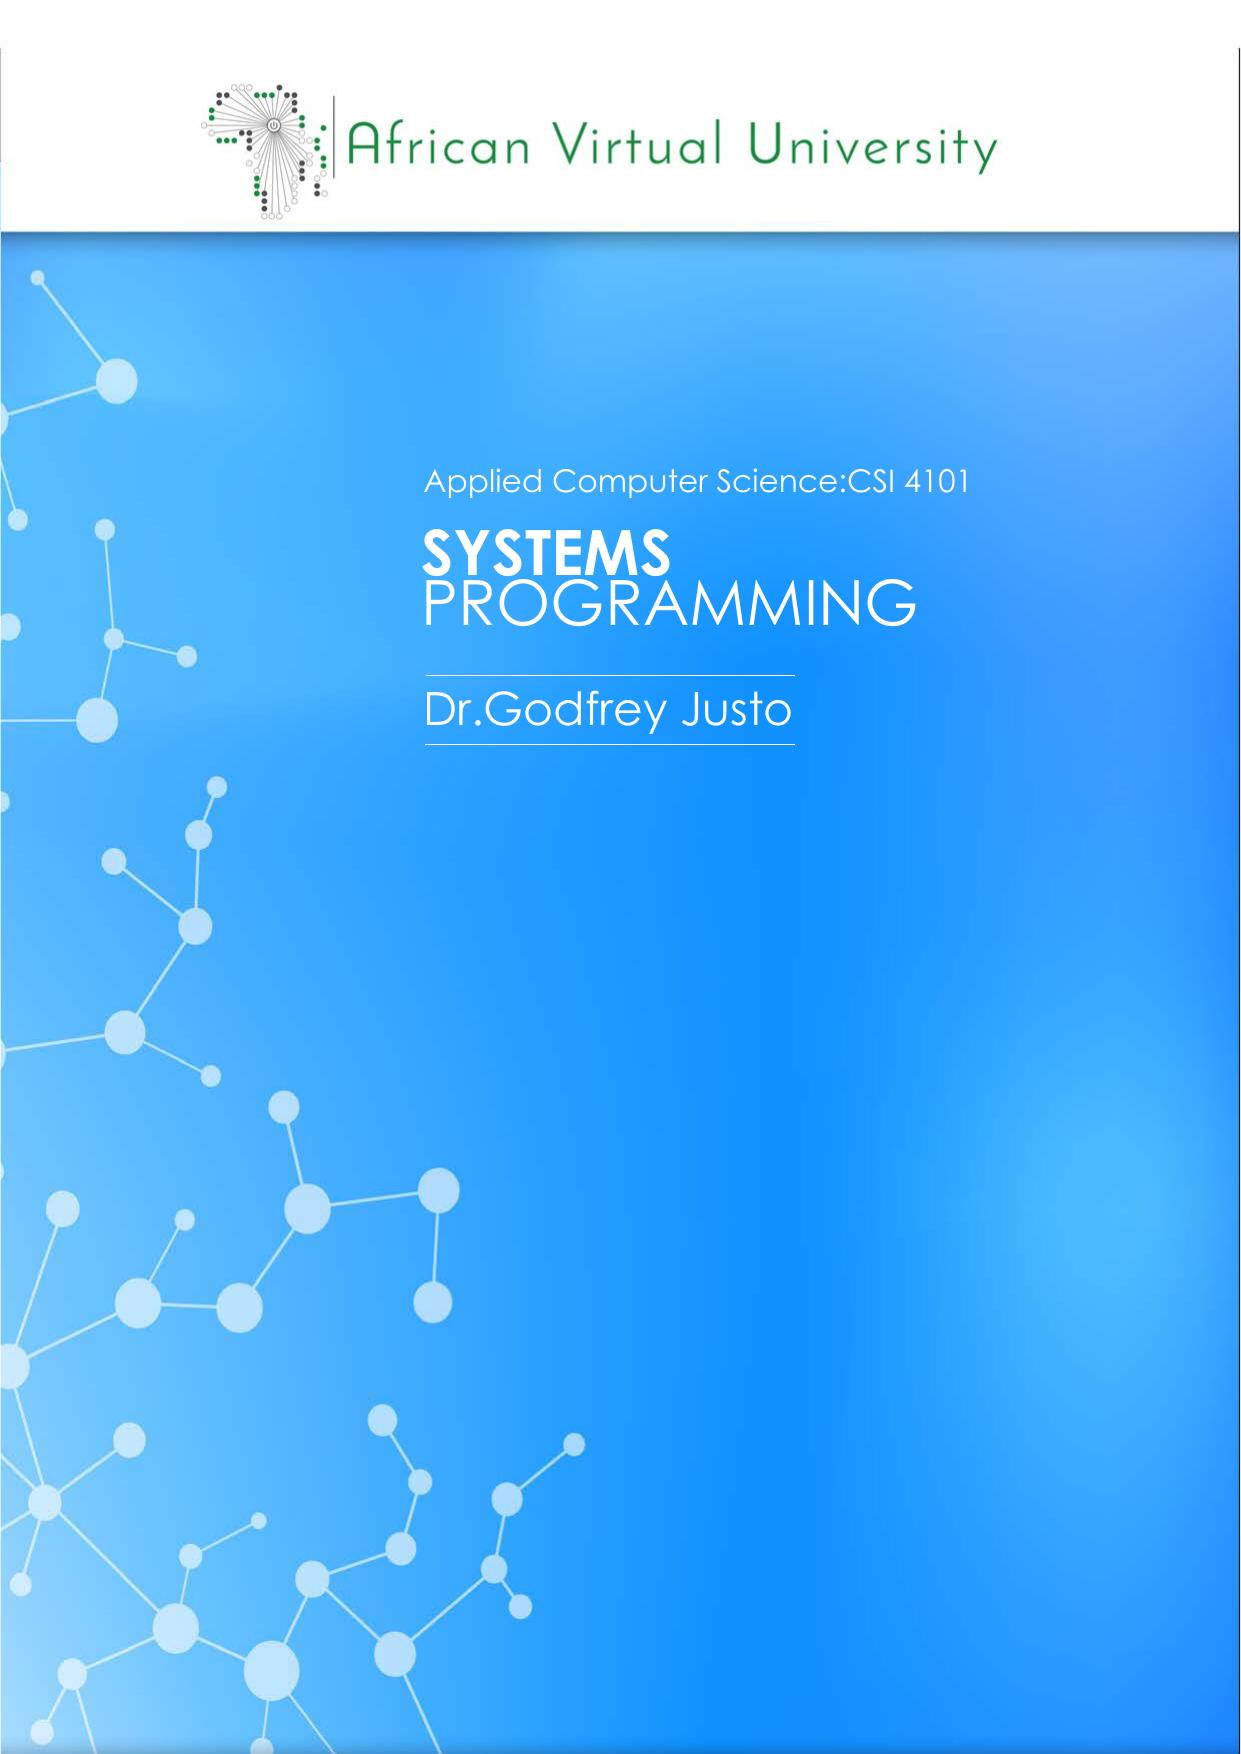 Applied Computer ScienceCSI 4101 Systems Programming1CCBY